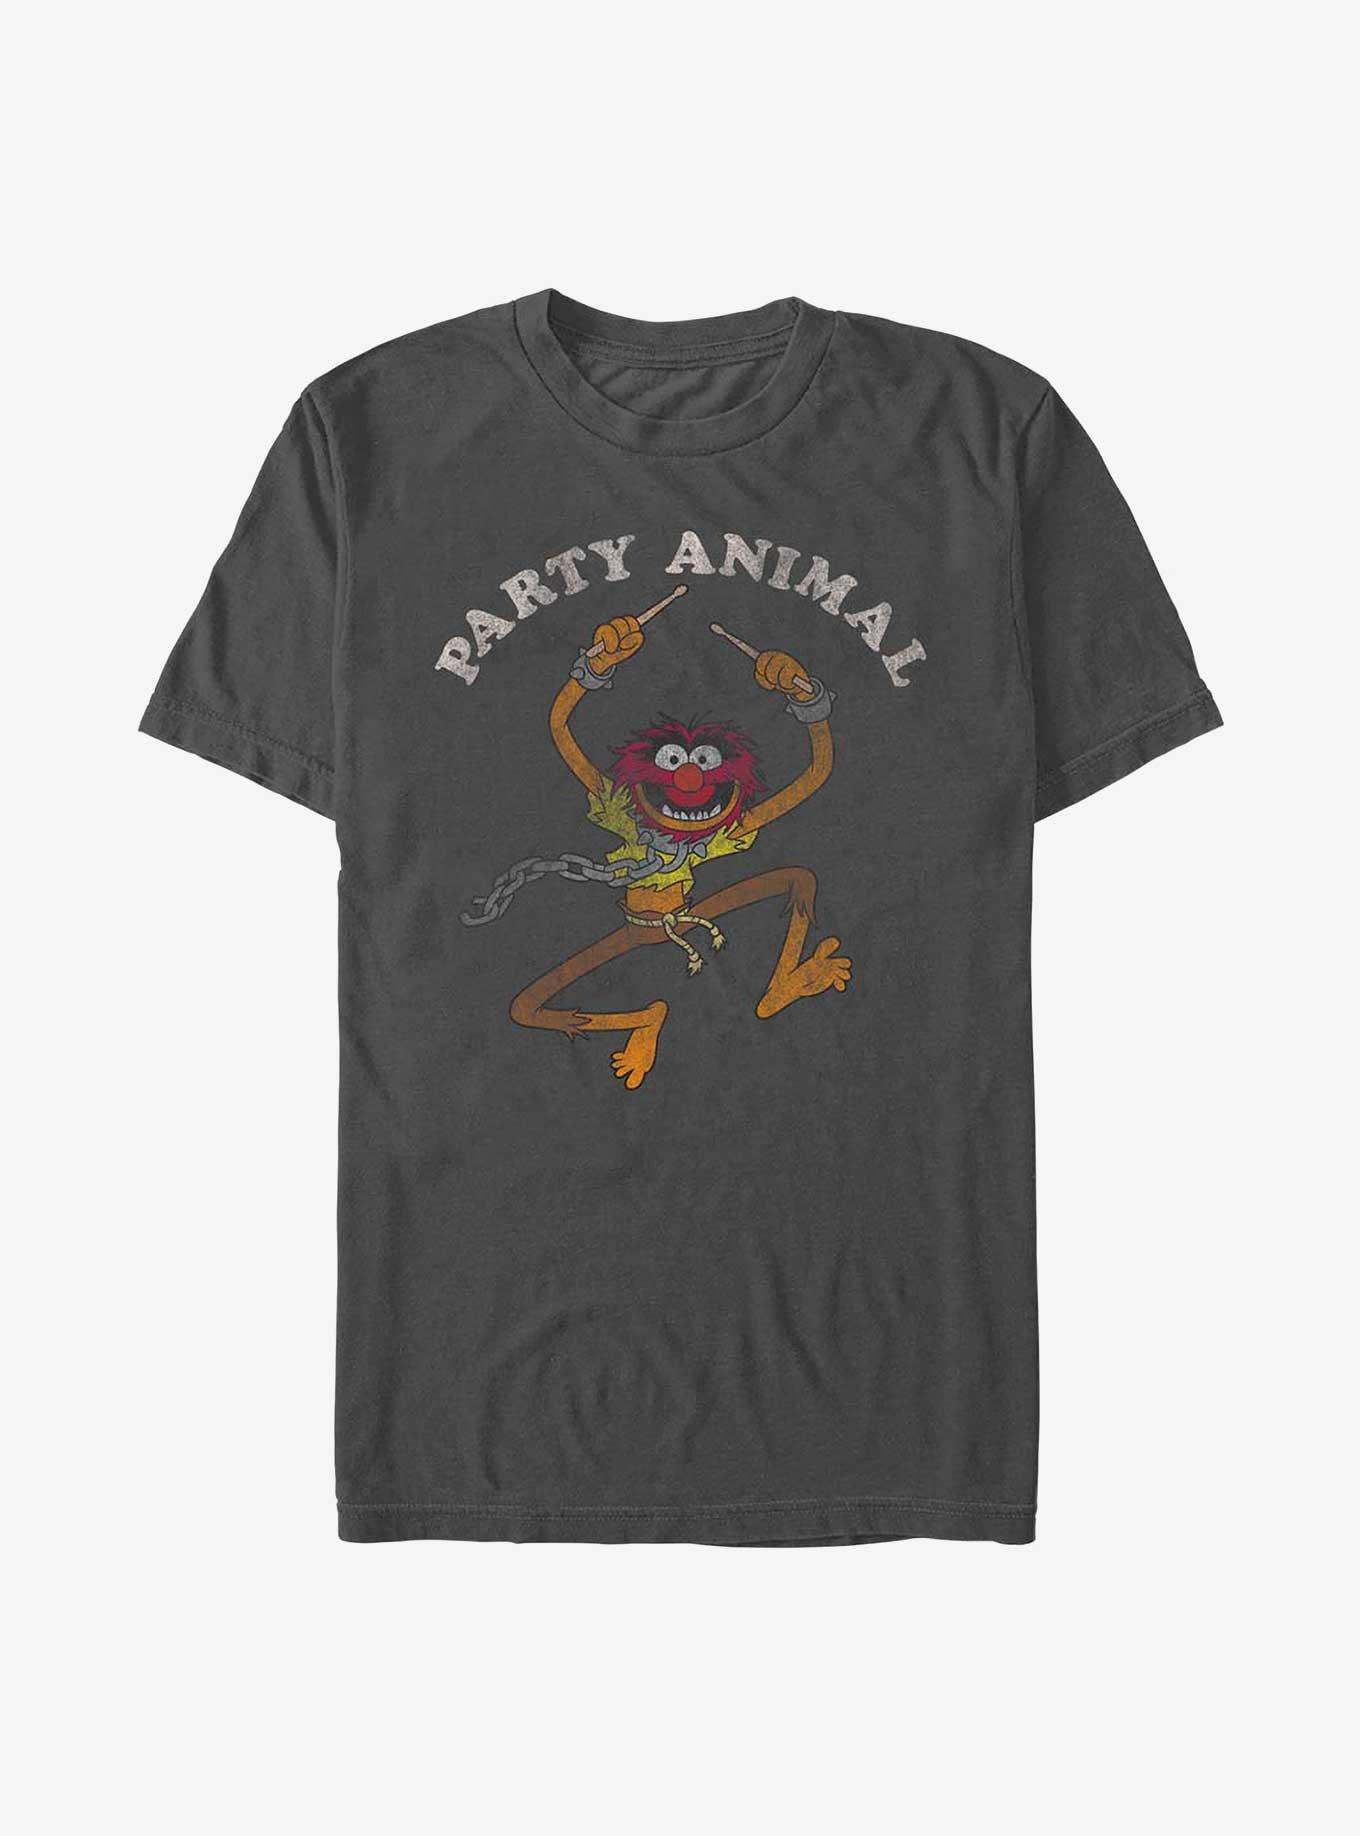 Disney The Muppets Party Animal T-Shirt, CHARCOAL, hi-res